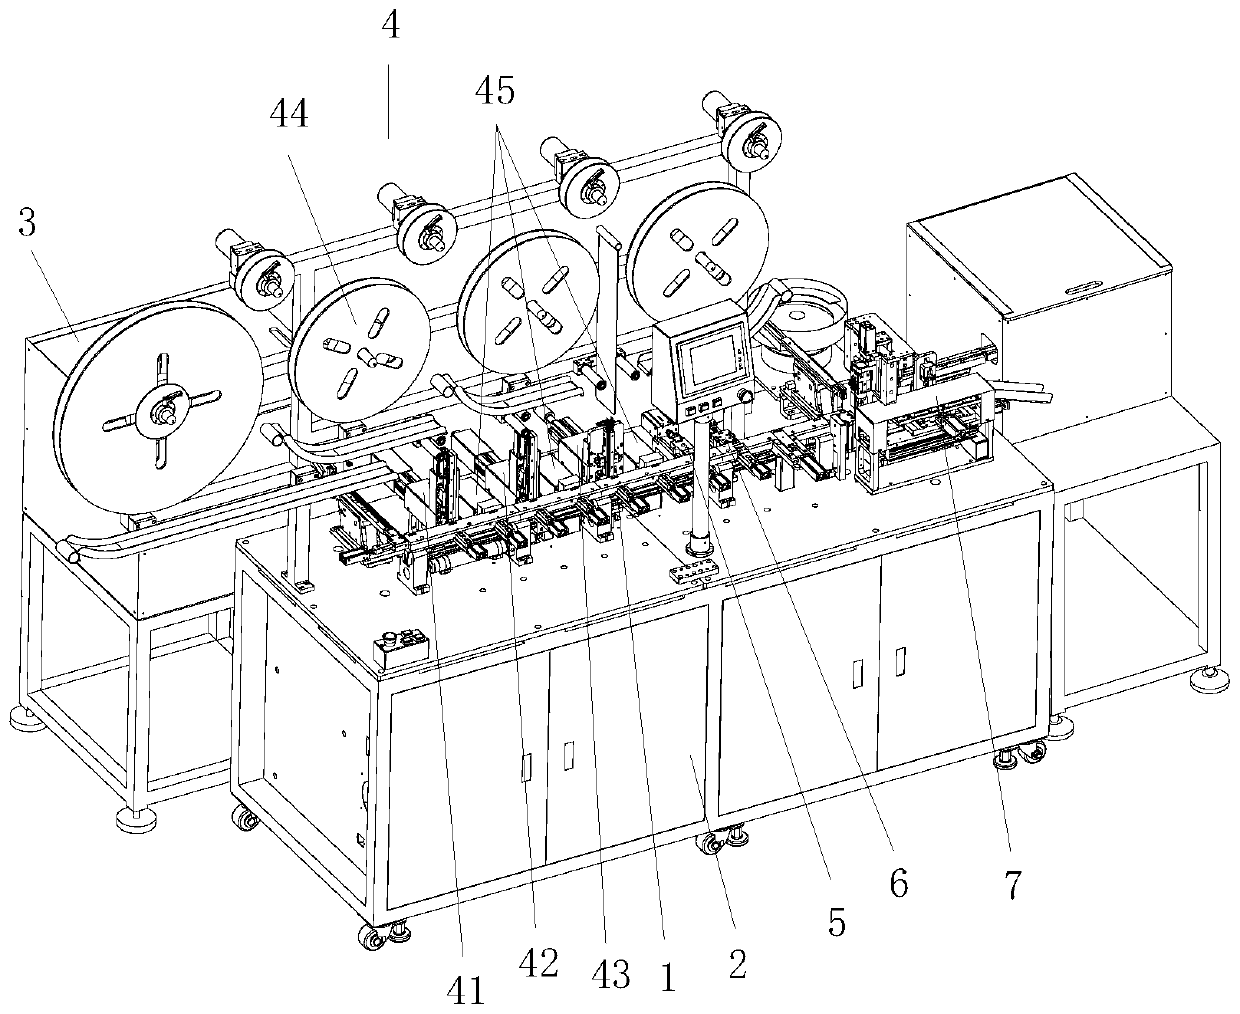 Automatic assembling device of power sockets